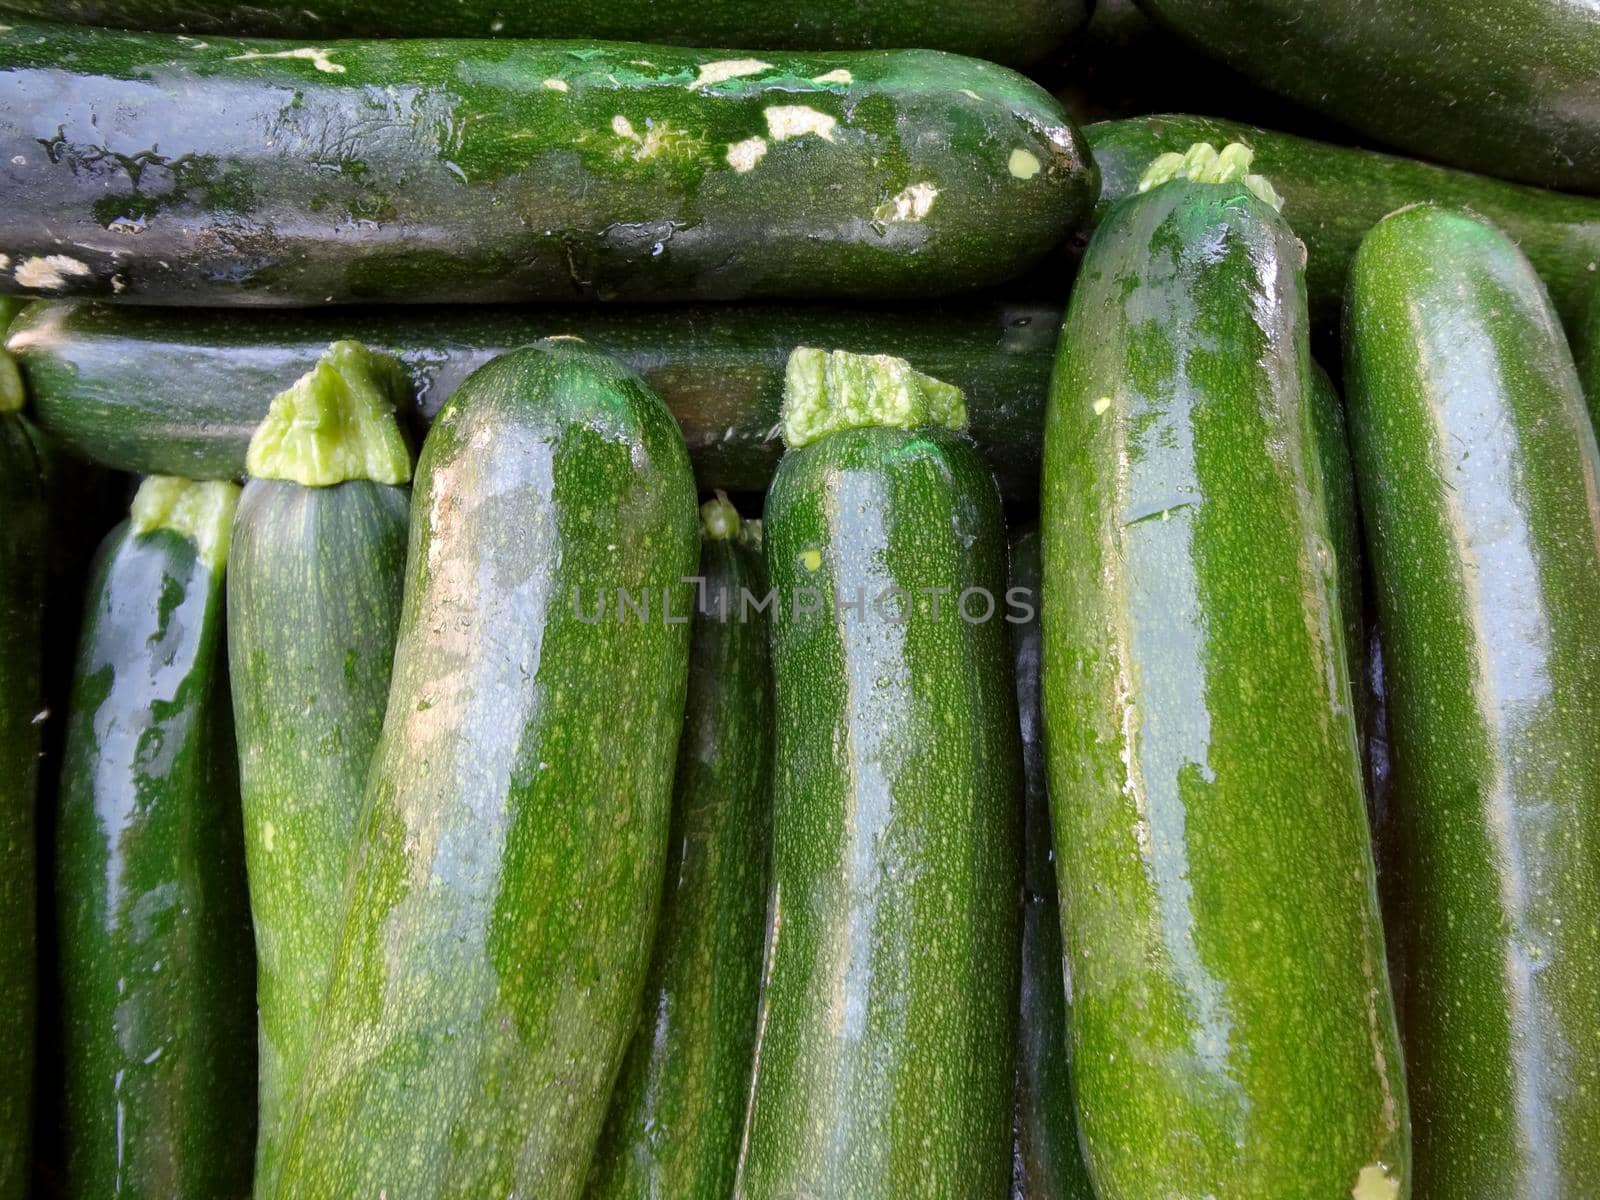 Zucchini for sale at Farmers Market.  The zucchini or courgette is a summer squash which can reach nearly 1 m in length, but is usually harvested immature at 15 to 25 cm.